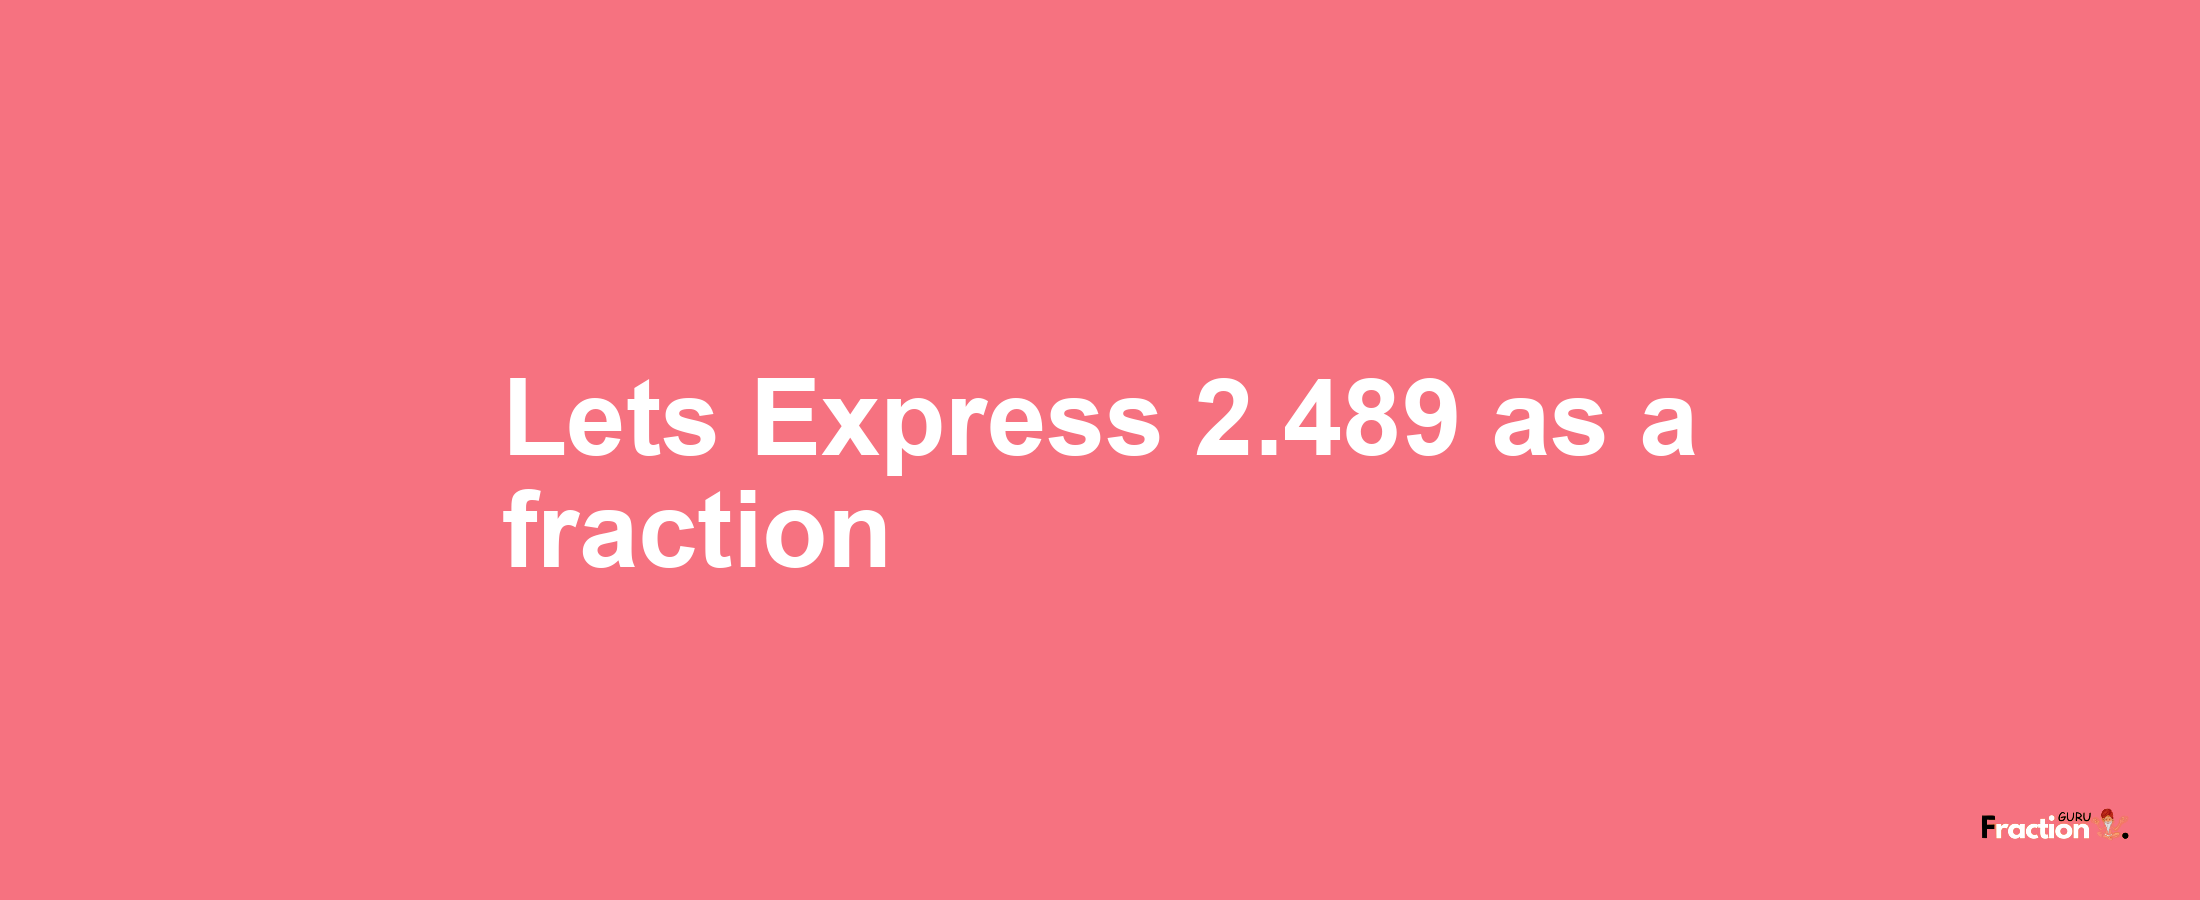 Lets Express 2.489 as afraction